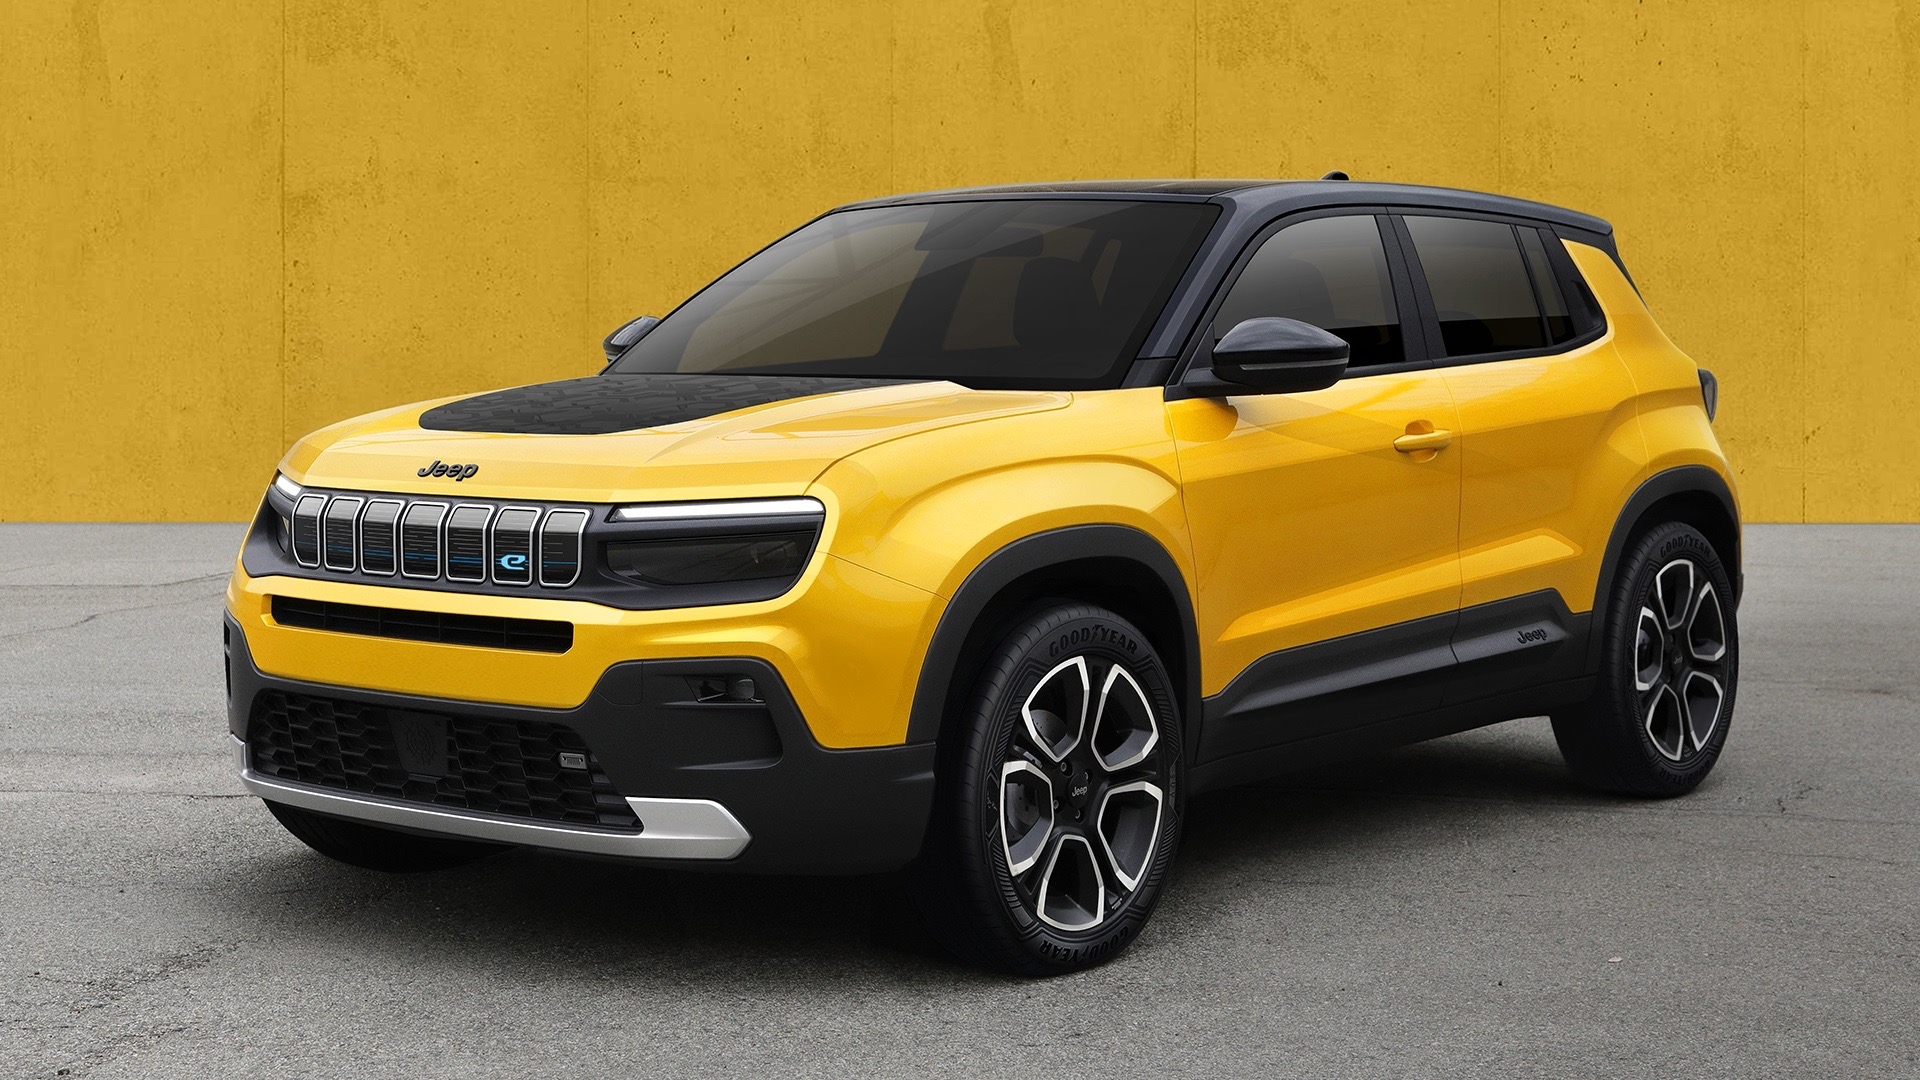 Images preview first-ever Jeep electric vehicle (EV), coming in 2023